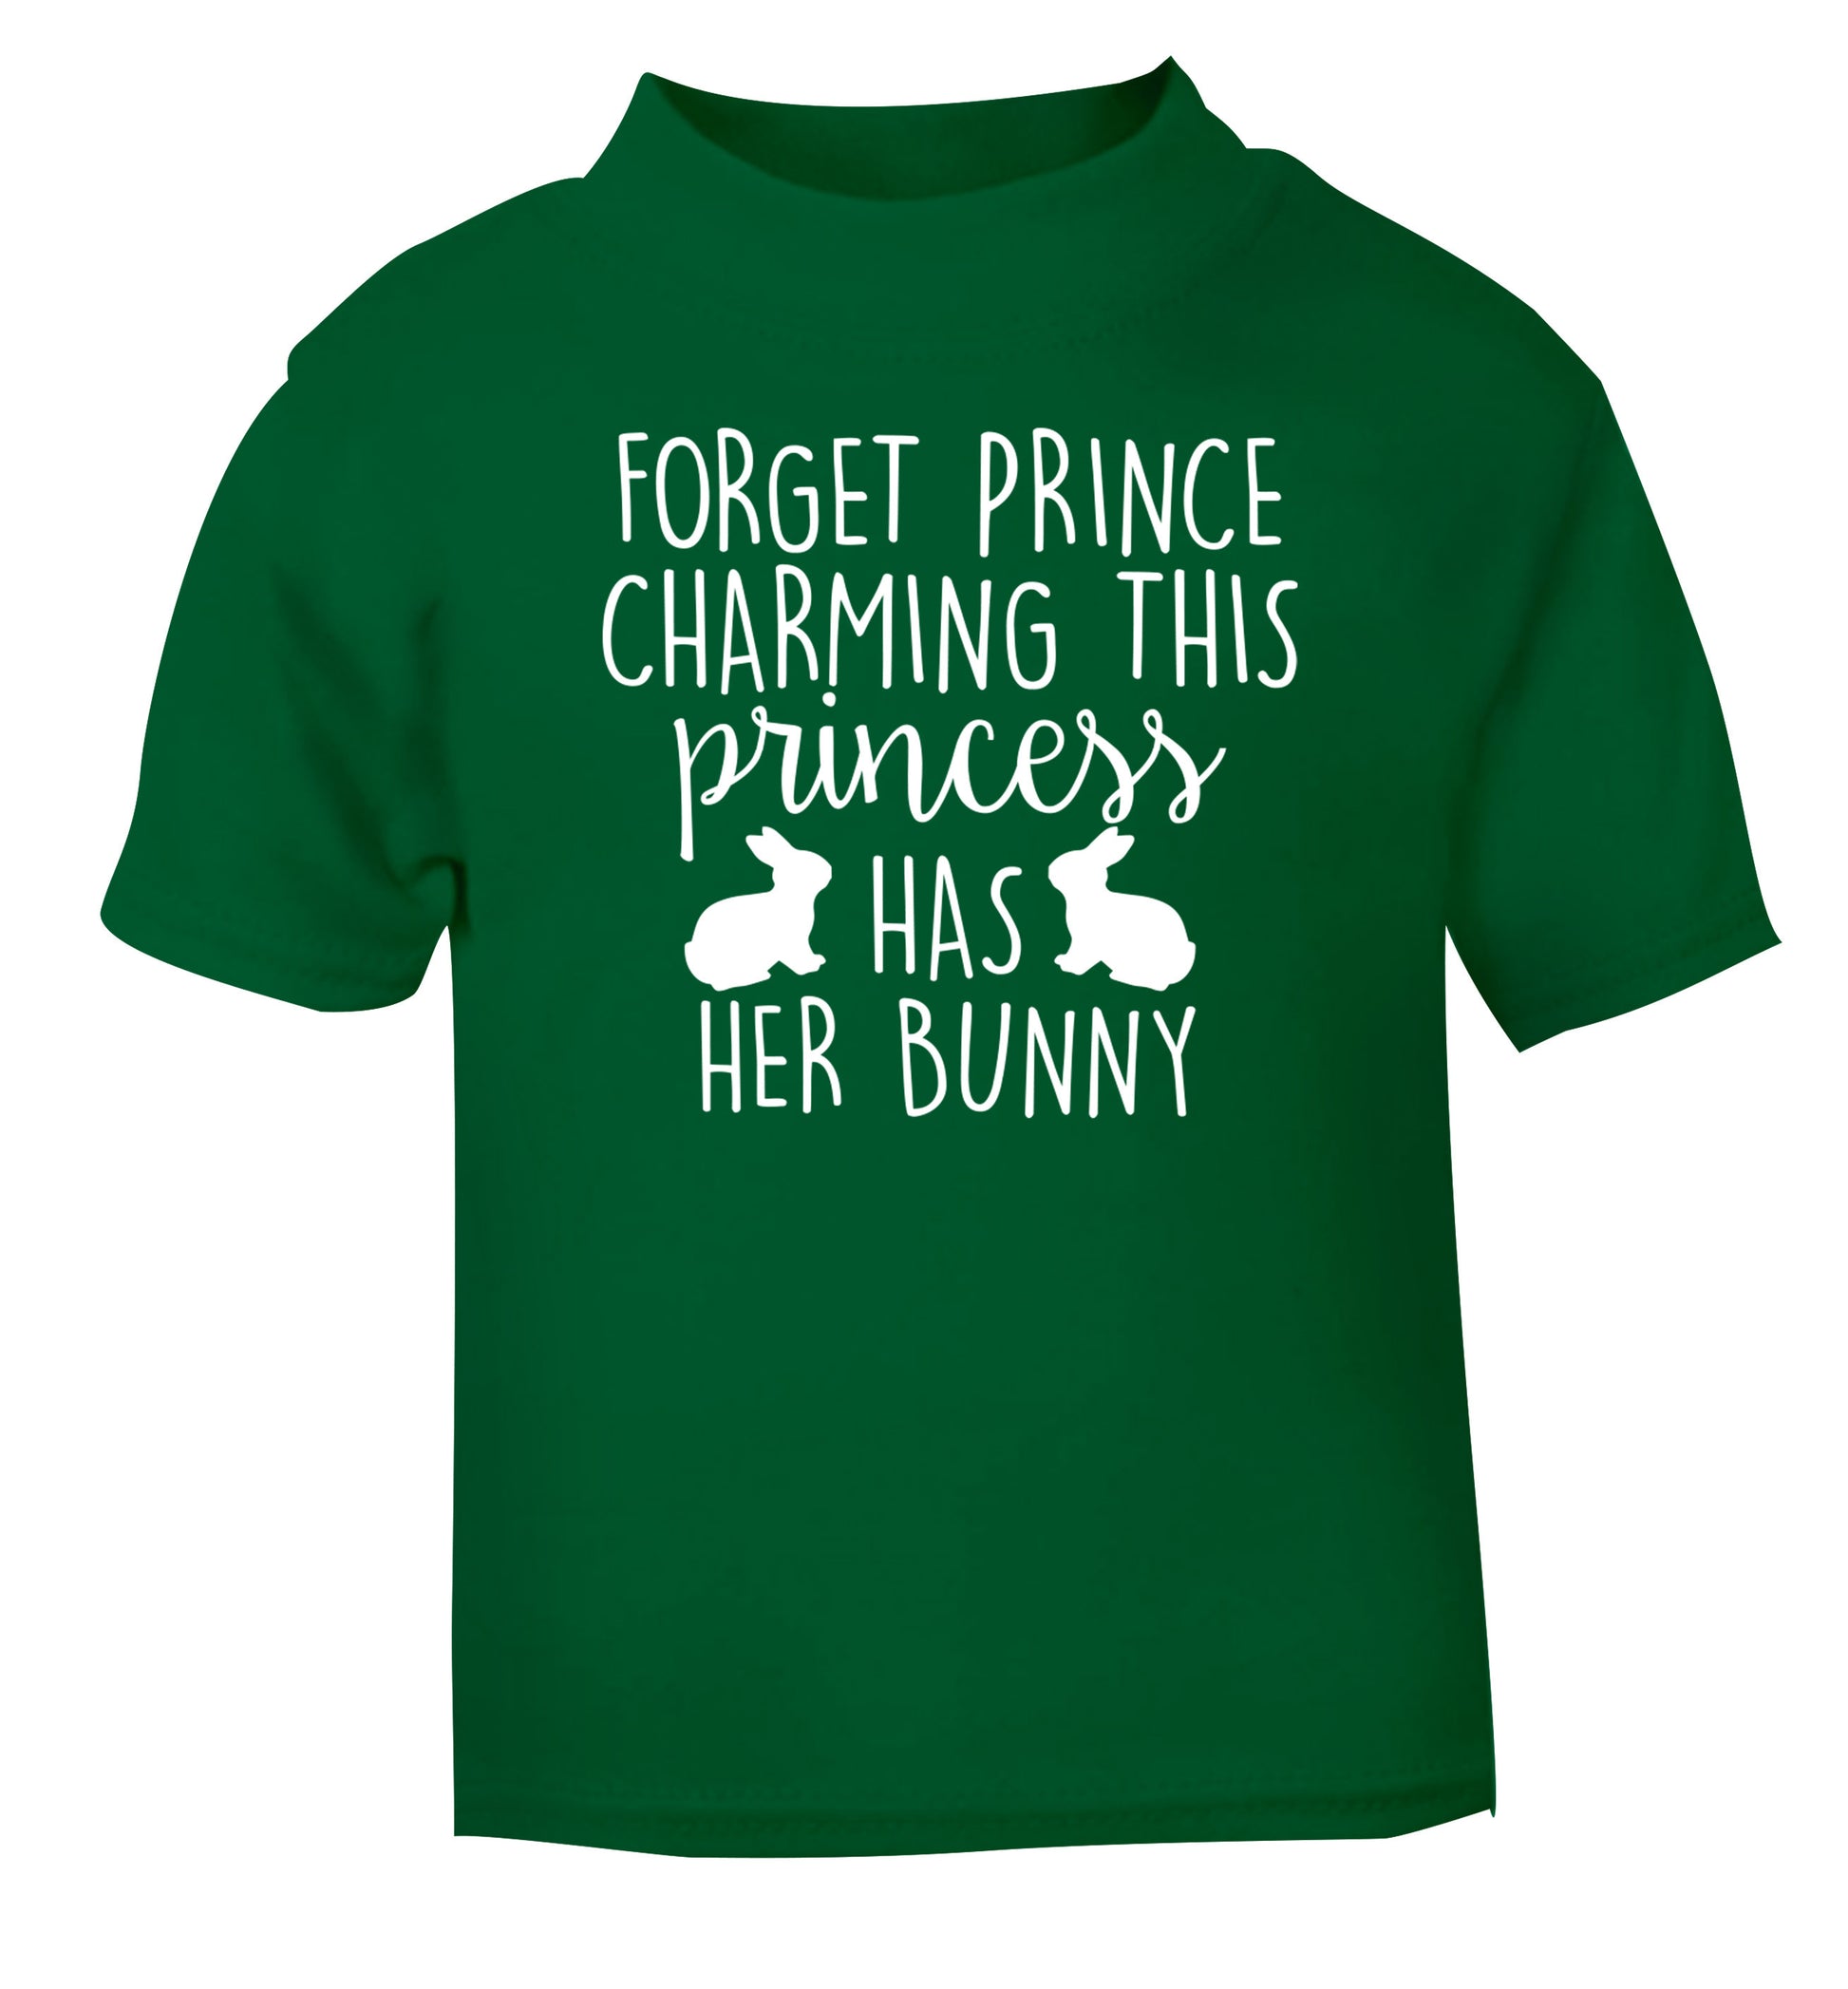 Forget prince charming this princess has her bunny green Baby Toddler Tshirt 2 Years